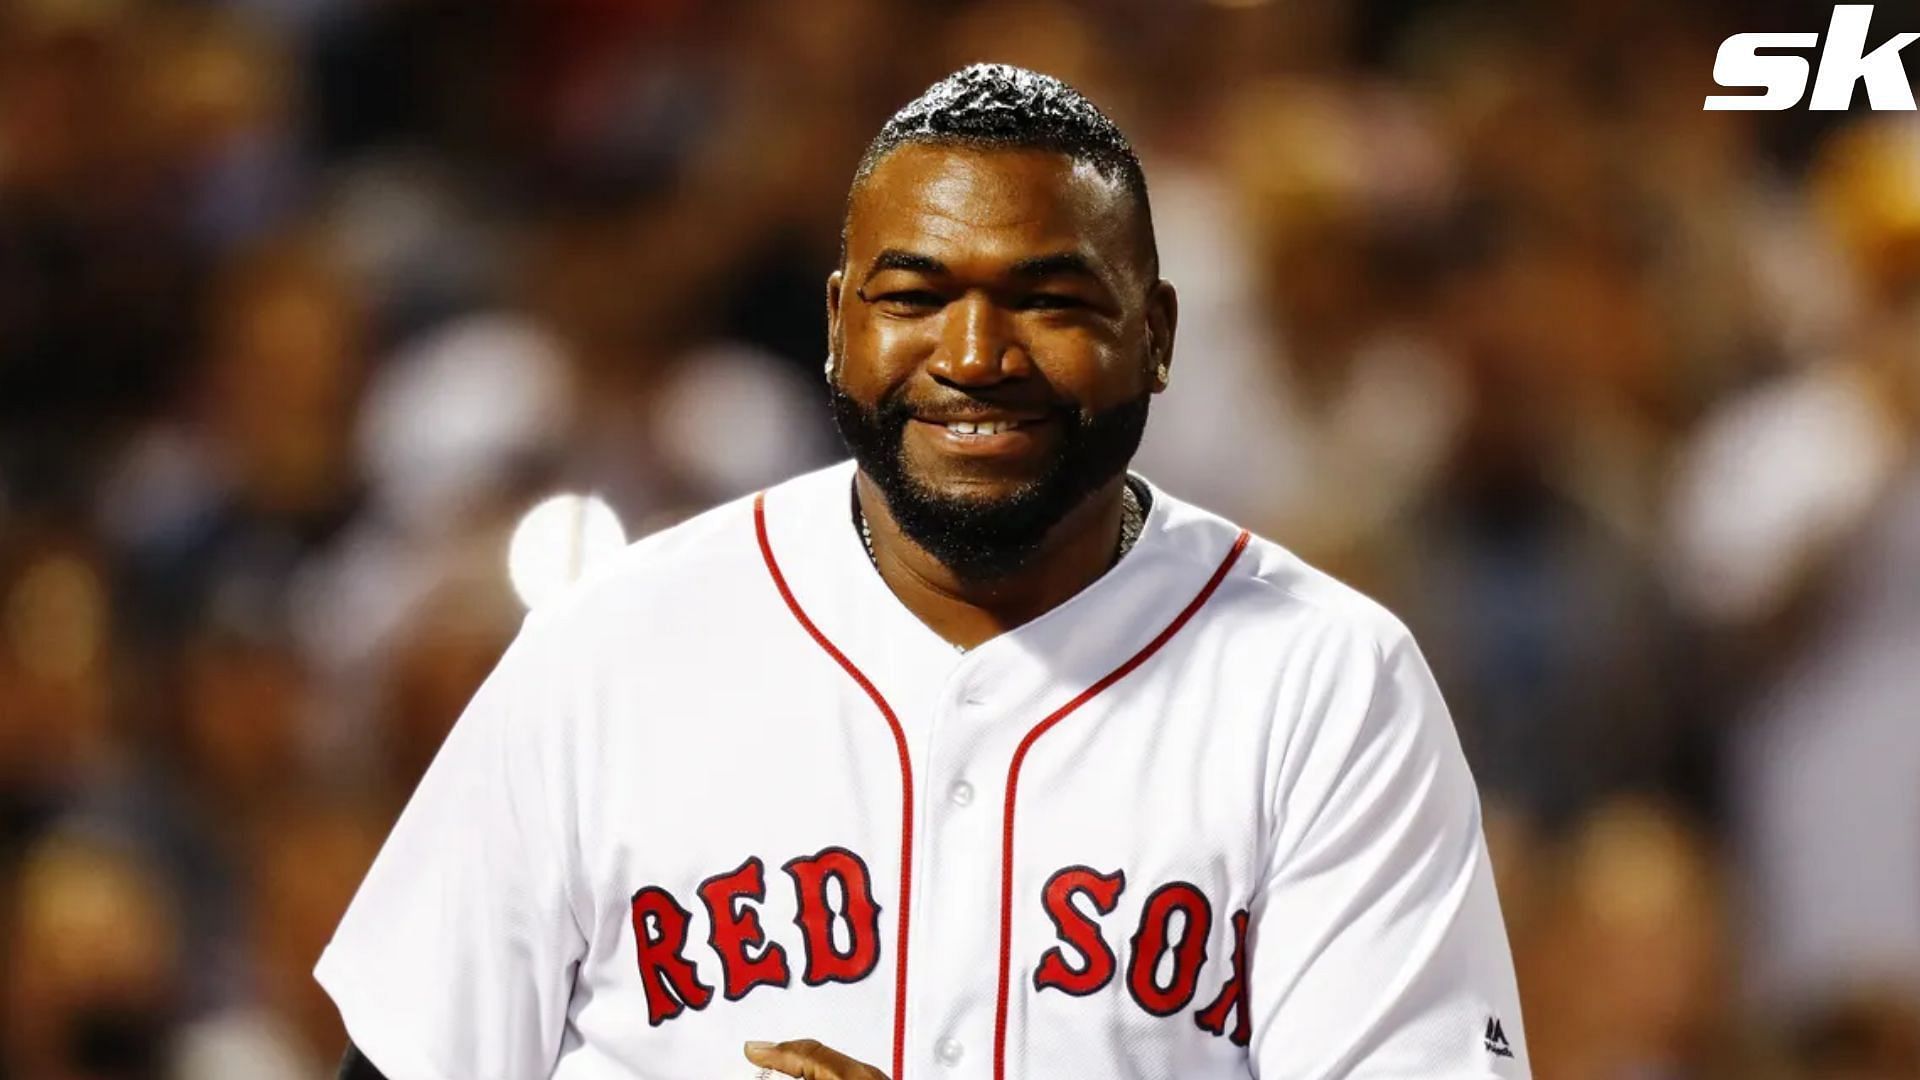 MLB - David Ortiz became a legend in Boston by leading the